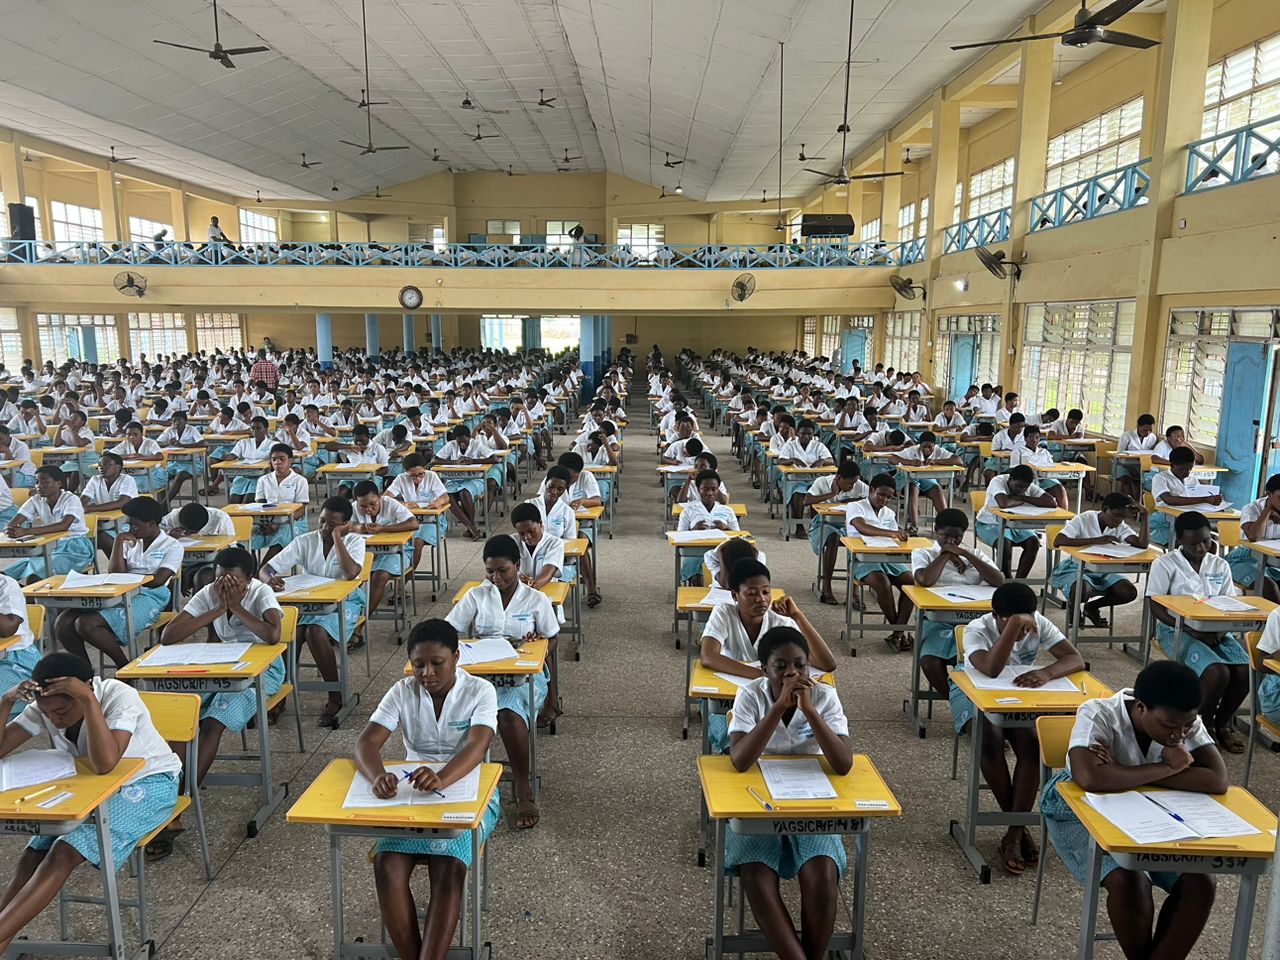 WAEC Must Go Tech To Stop Exams Paper Leakage